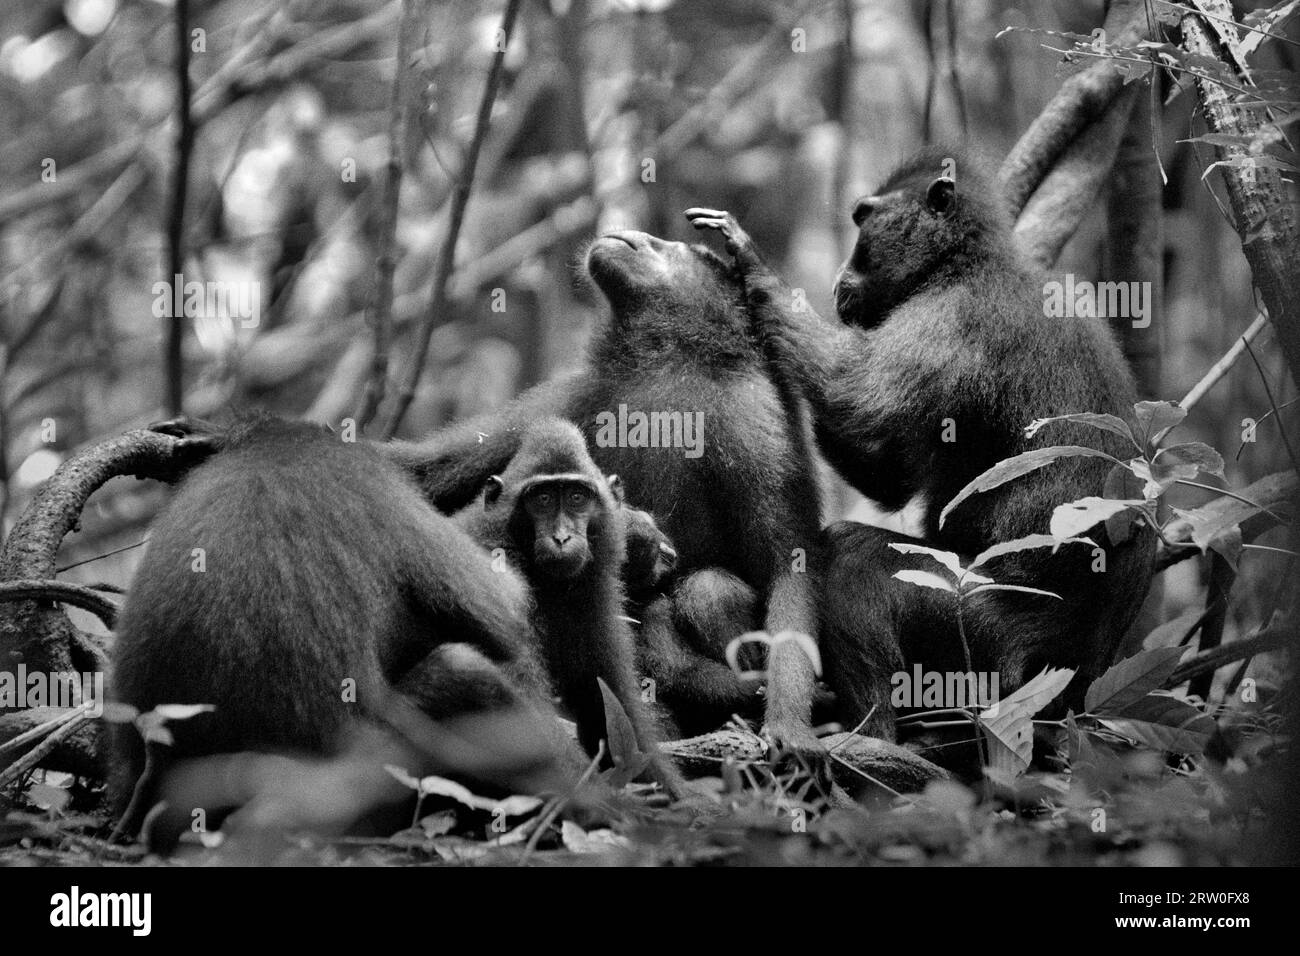 A group of Sulawesi black-crested macaque (Macaca nigra) is photographed as they are having social activity in Tangkoko Nature Reserve, North Sulawesi, Indonesia.  Climate change and disease are emerging threats to primates, while crested macaque belongs to the 10% of primate species that are highly vulnerable to droughts, according to primatologists. A recent report revealed that the temperature is indeed increasing in Tangkoko forest, and the overall fruit abundance decreased. Macaca nigra is considered a key species in their habitat, an important 'umbrella species' for... Stock Photo